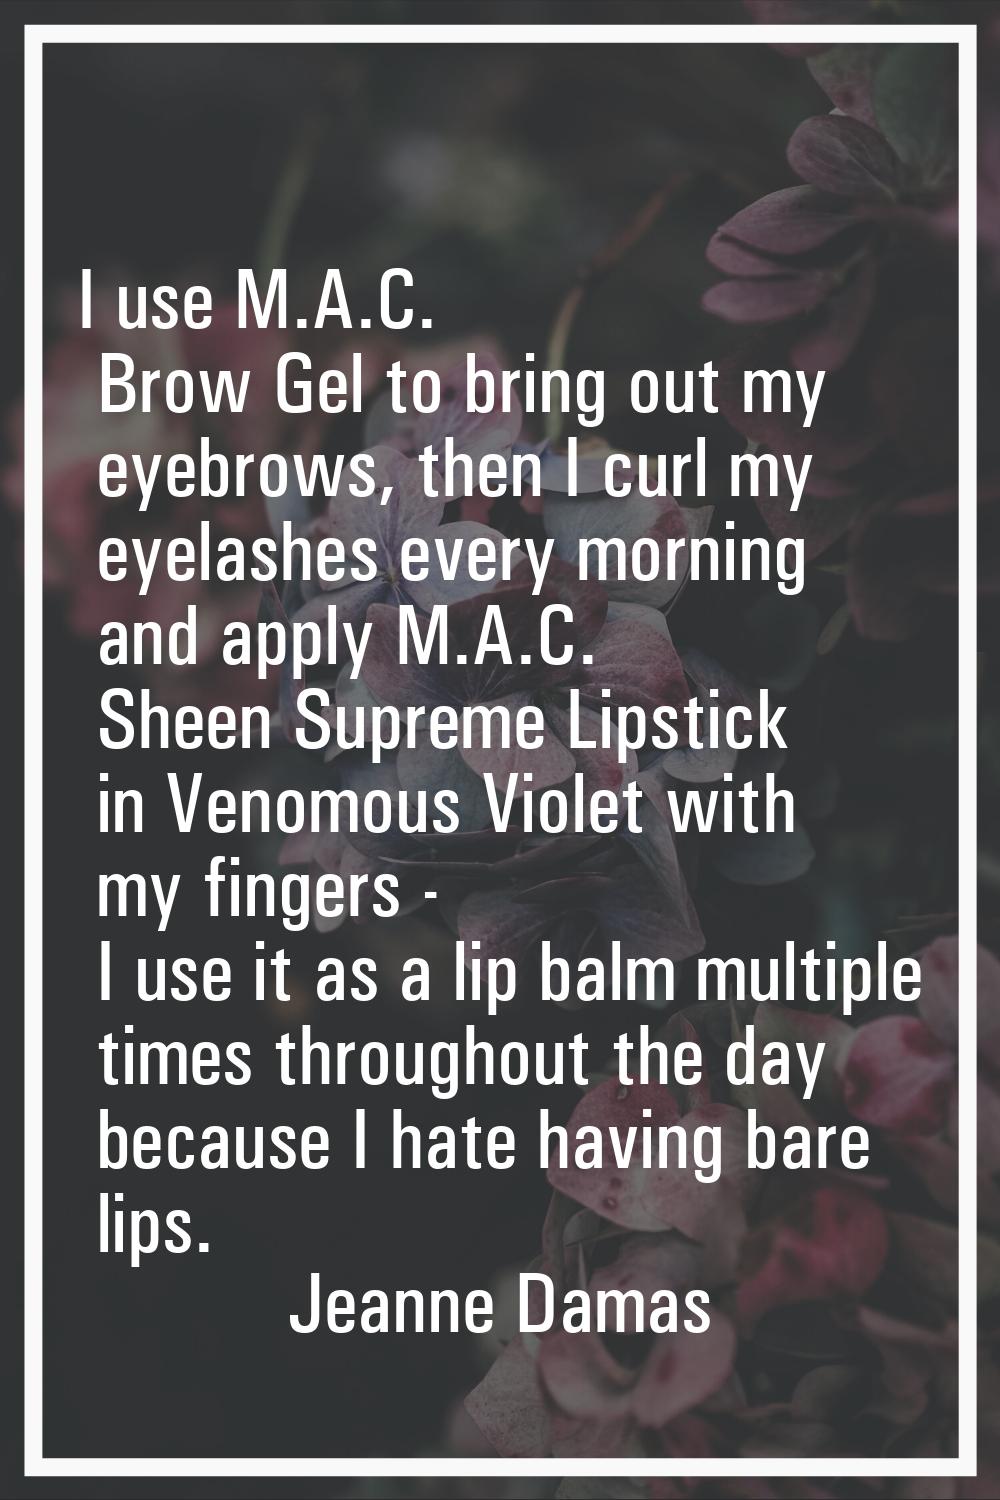 I use M.A.C. Brow Gel to bring out my eyebrows, then I curl my eyelashes every morning and apply M.